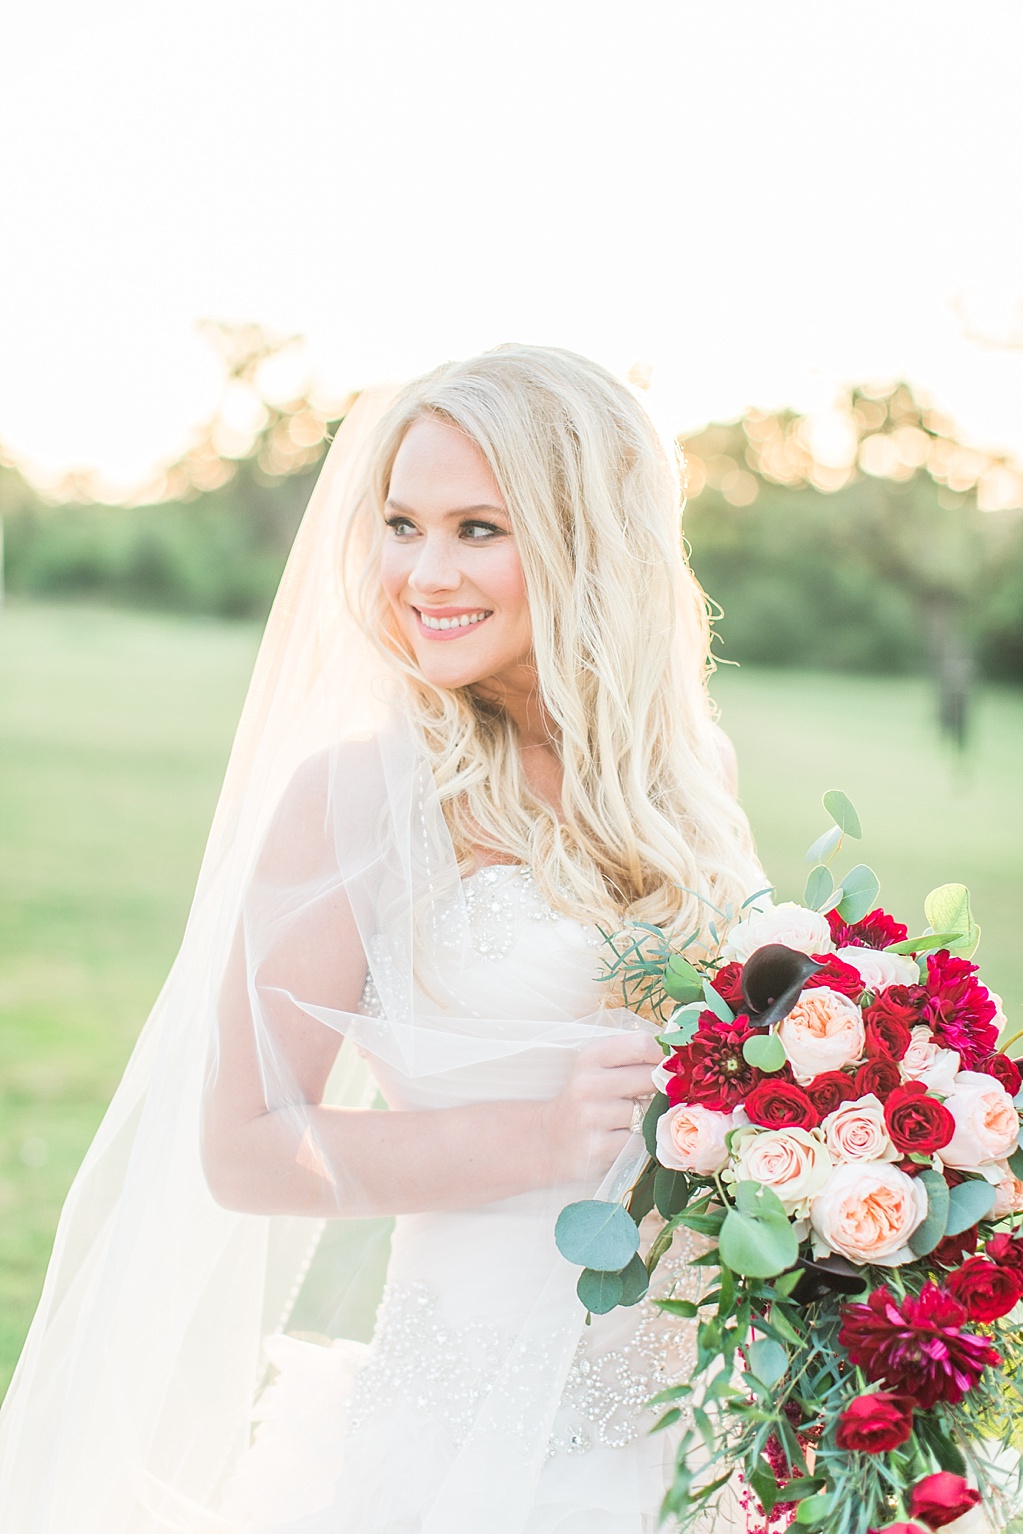 A Classic Bridal Session at Turtle Creek Olive Grove Wedding Venue in Kerrville, Texas 0019